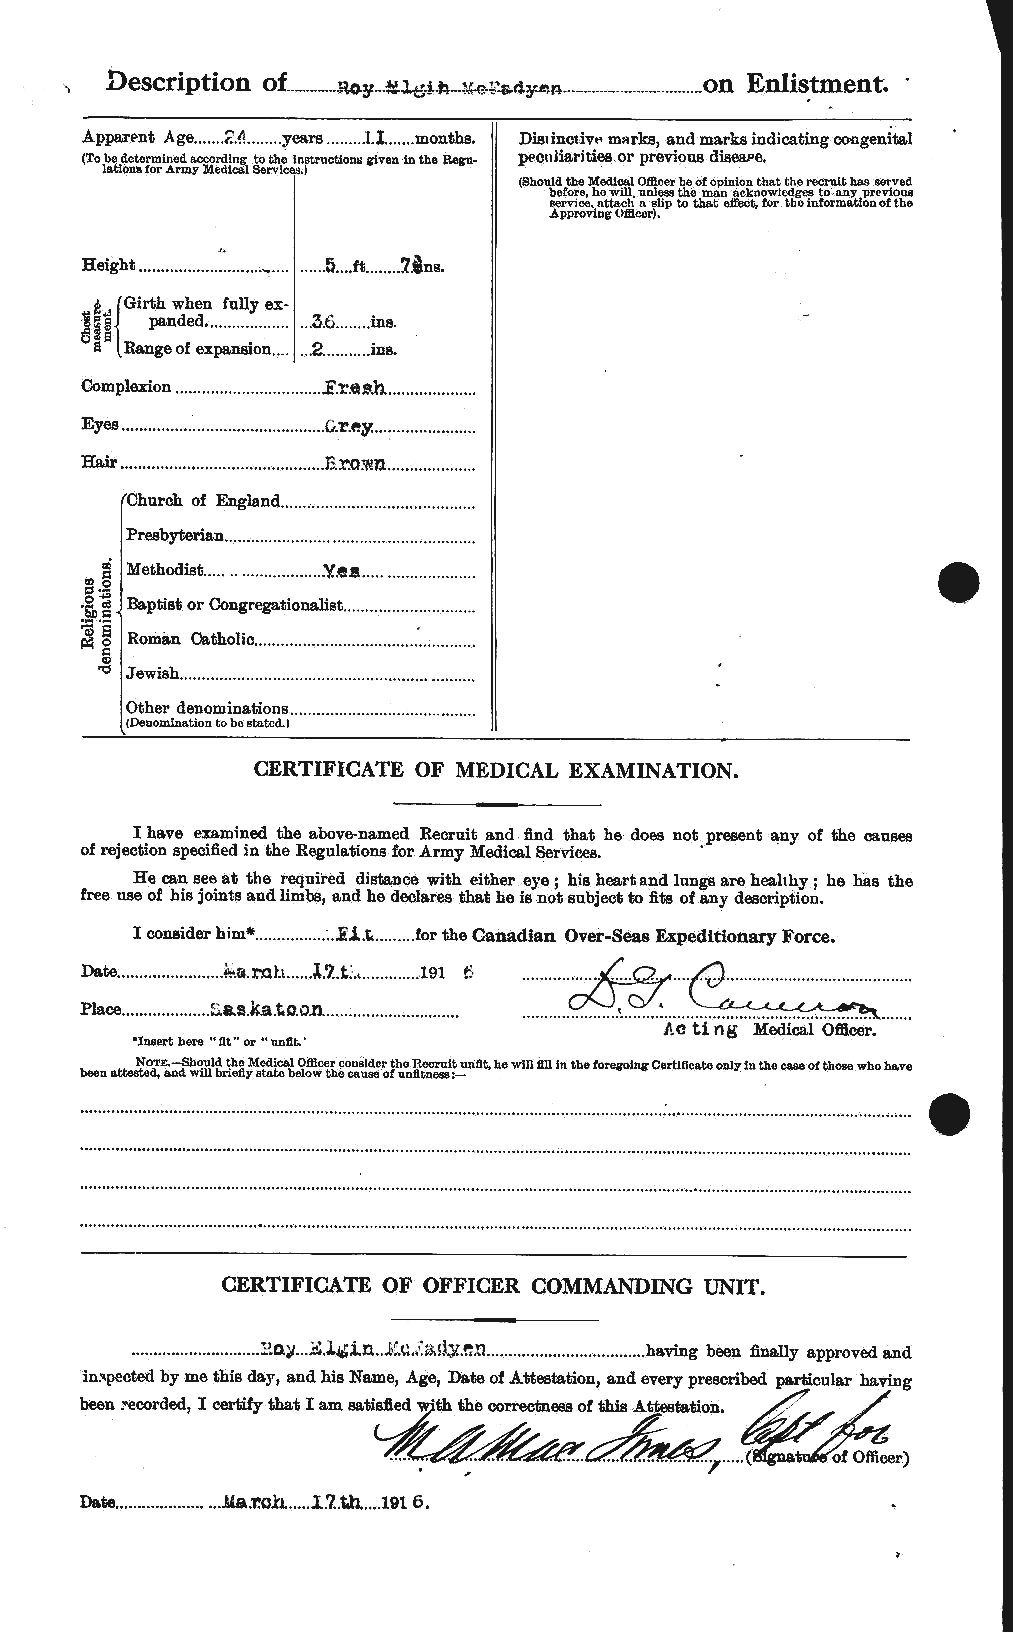 Personnel Records of the First World War - CEF 521213b